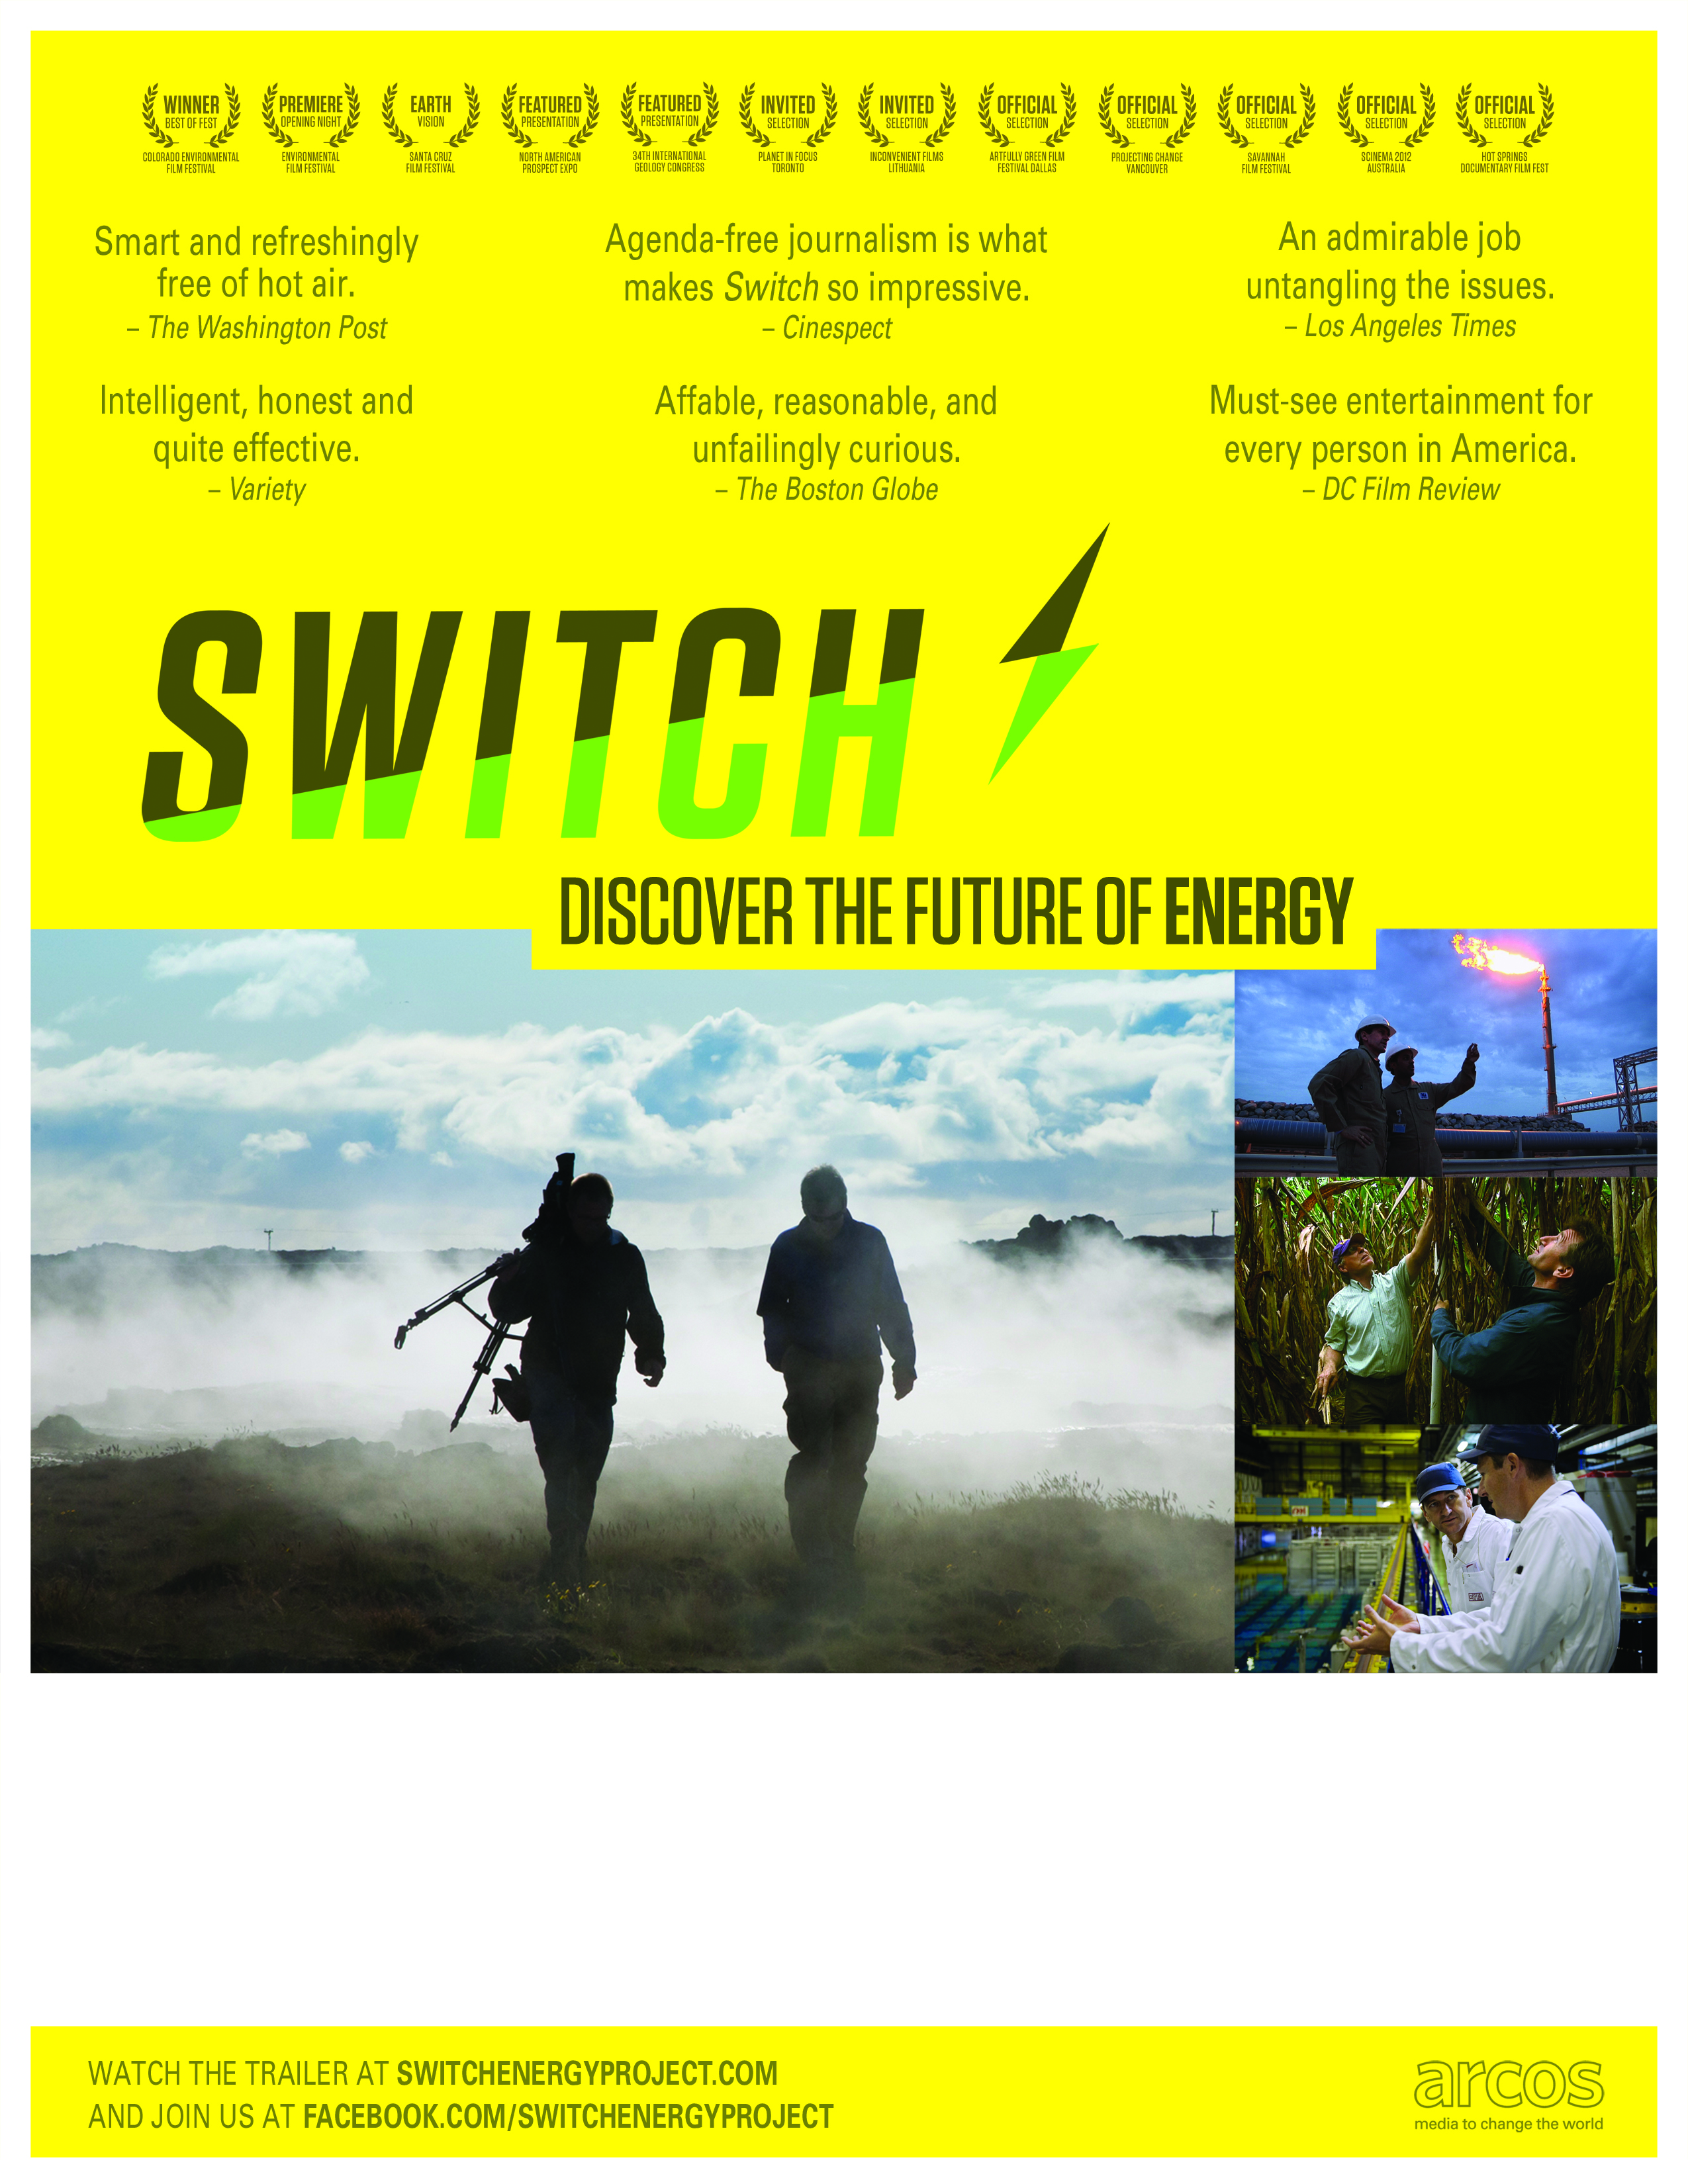 PHOTO: The "Switch" film poster used for promotional material. Photo courtesy of Switch Energy Alliance.